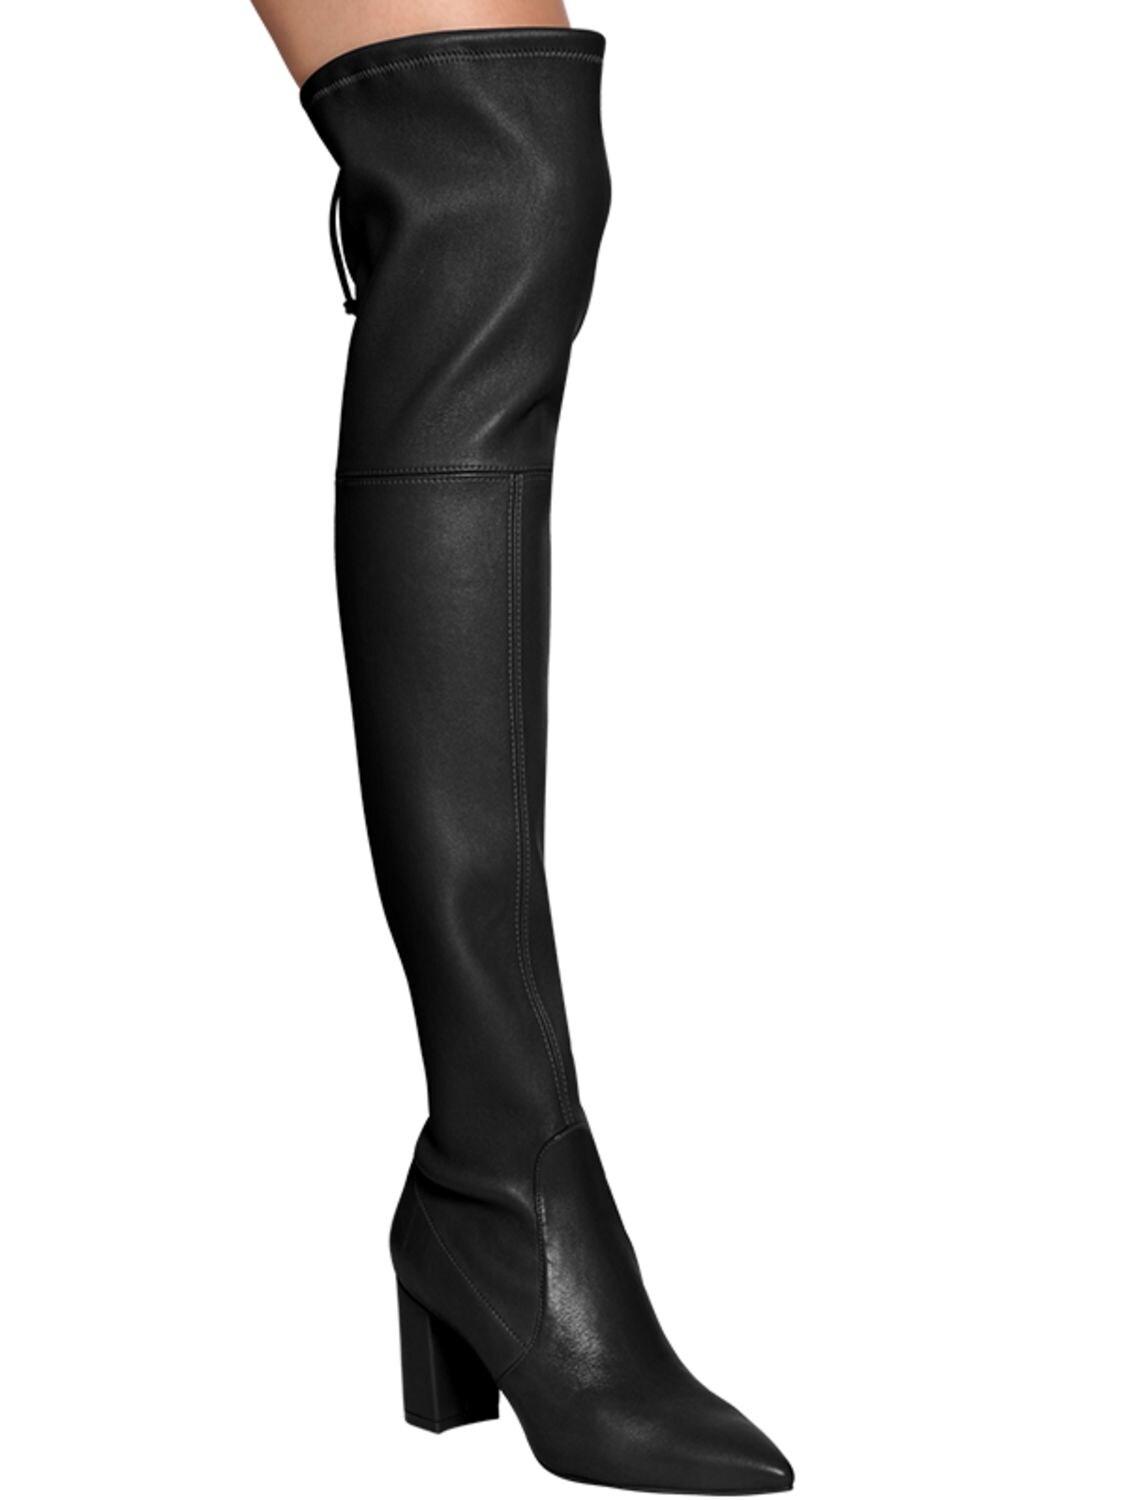 Stuart Weitzman 75mm Lesley Stretch Leather Boots in Black - Lyst